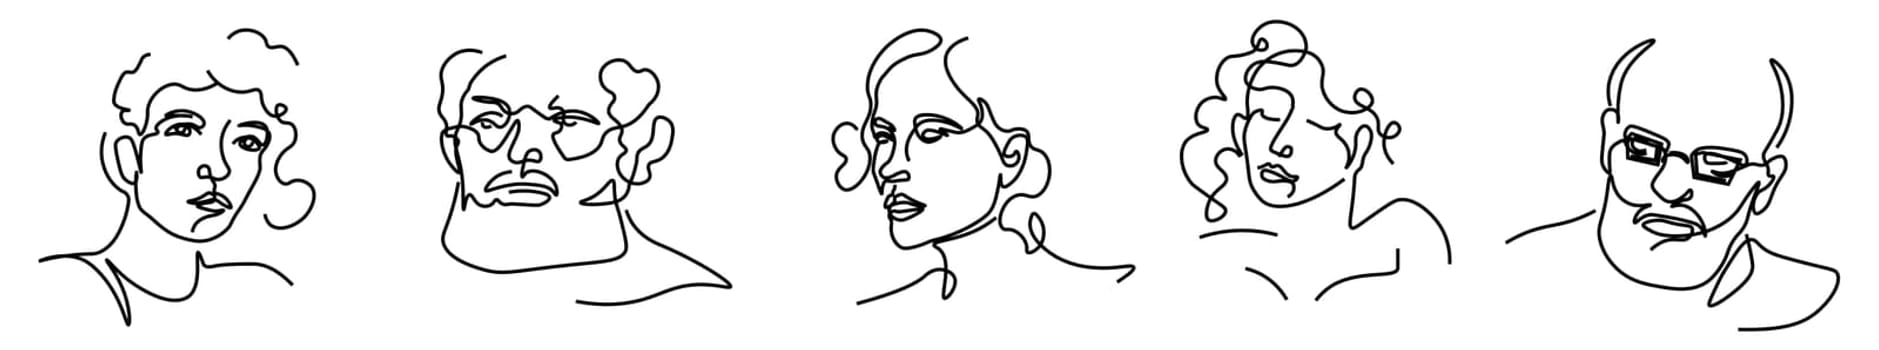 Portrait of people, abstract line art sketches